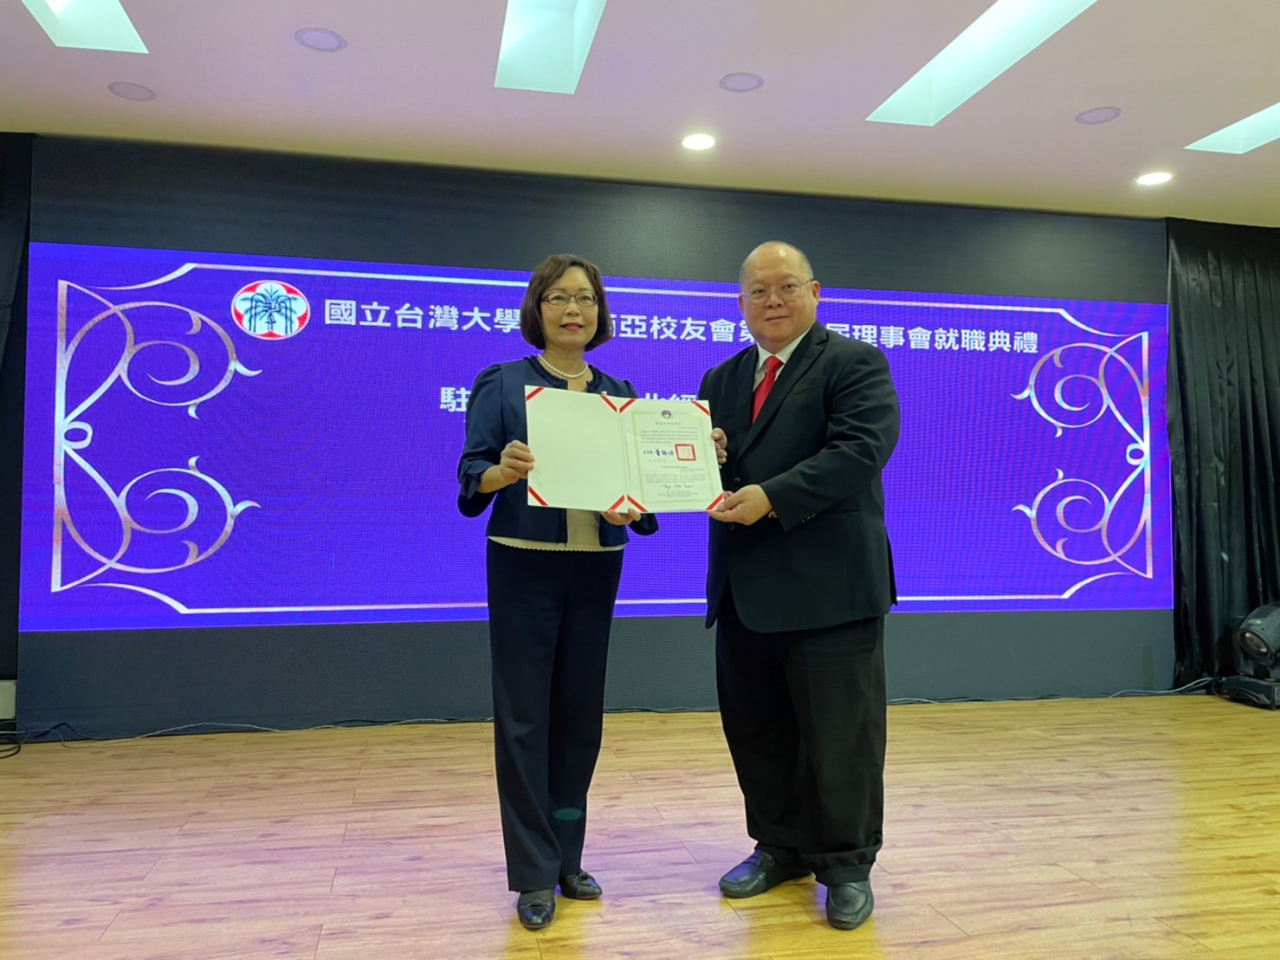 Representative Anne Hung presented the congratulatory letter on behalf of Tung Chen-yuan, Minister of the Overseas Community Affairs Council.